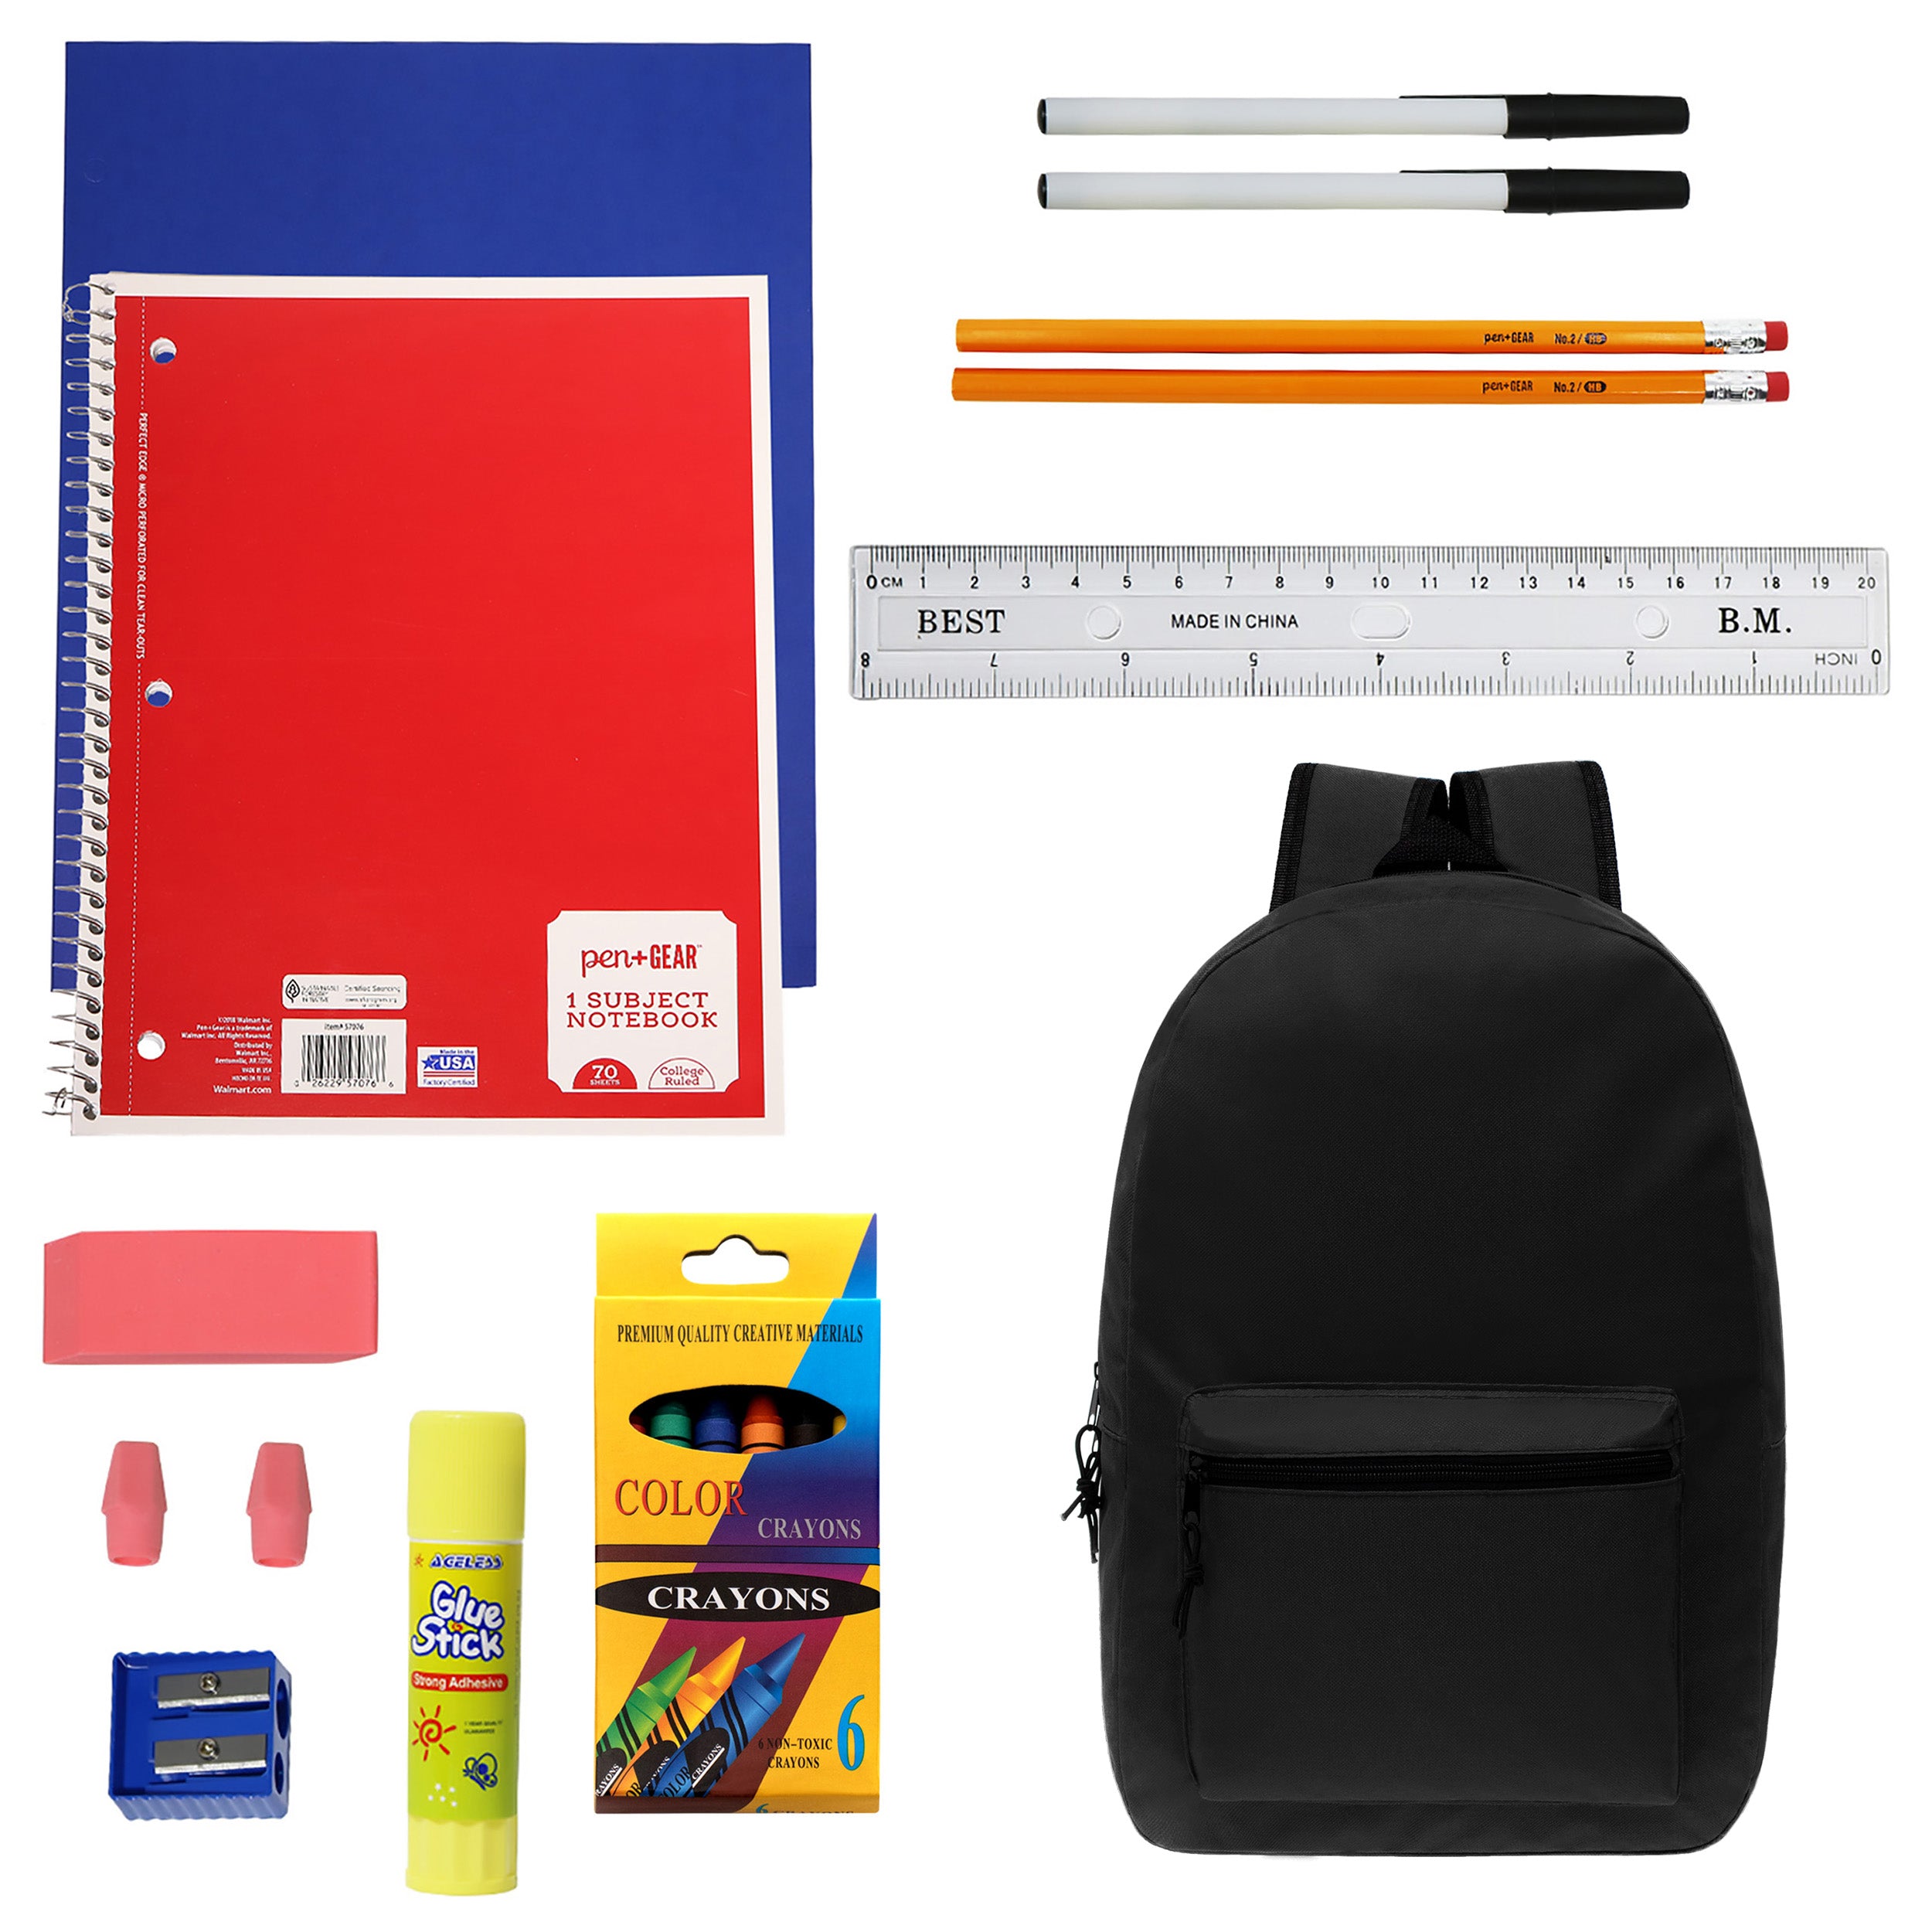 50 Piece Wholesale Basic School Supply Kit With 17 Backpack All Black